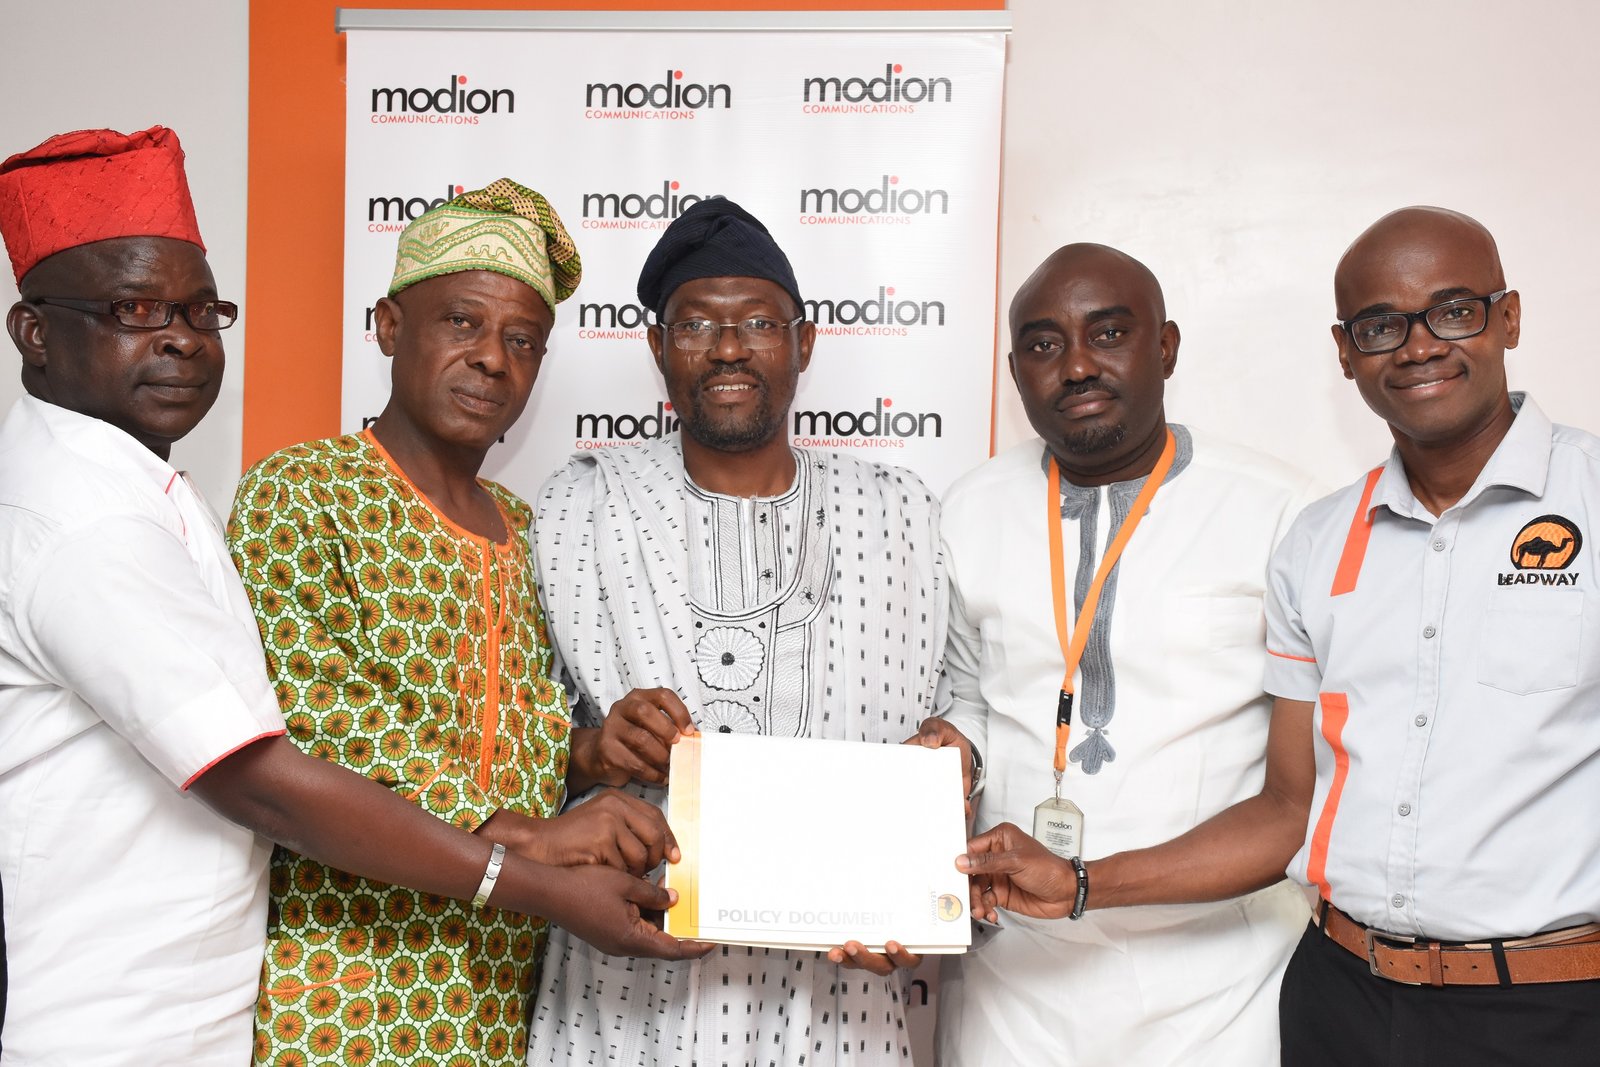 Modion Communications Partners Leadway Assurance to Provide Insurance Cover for Nigerian Photo Journalists